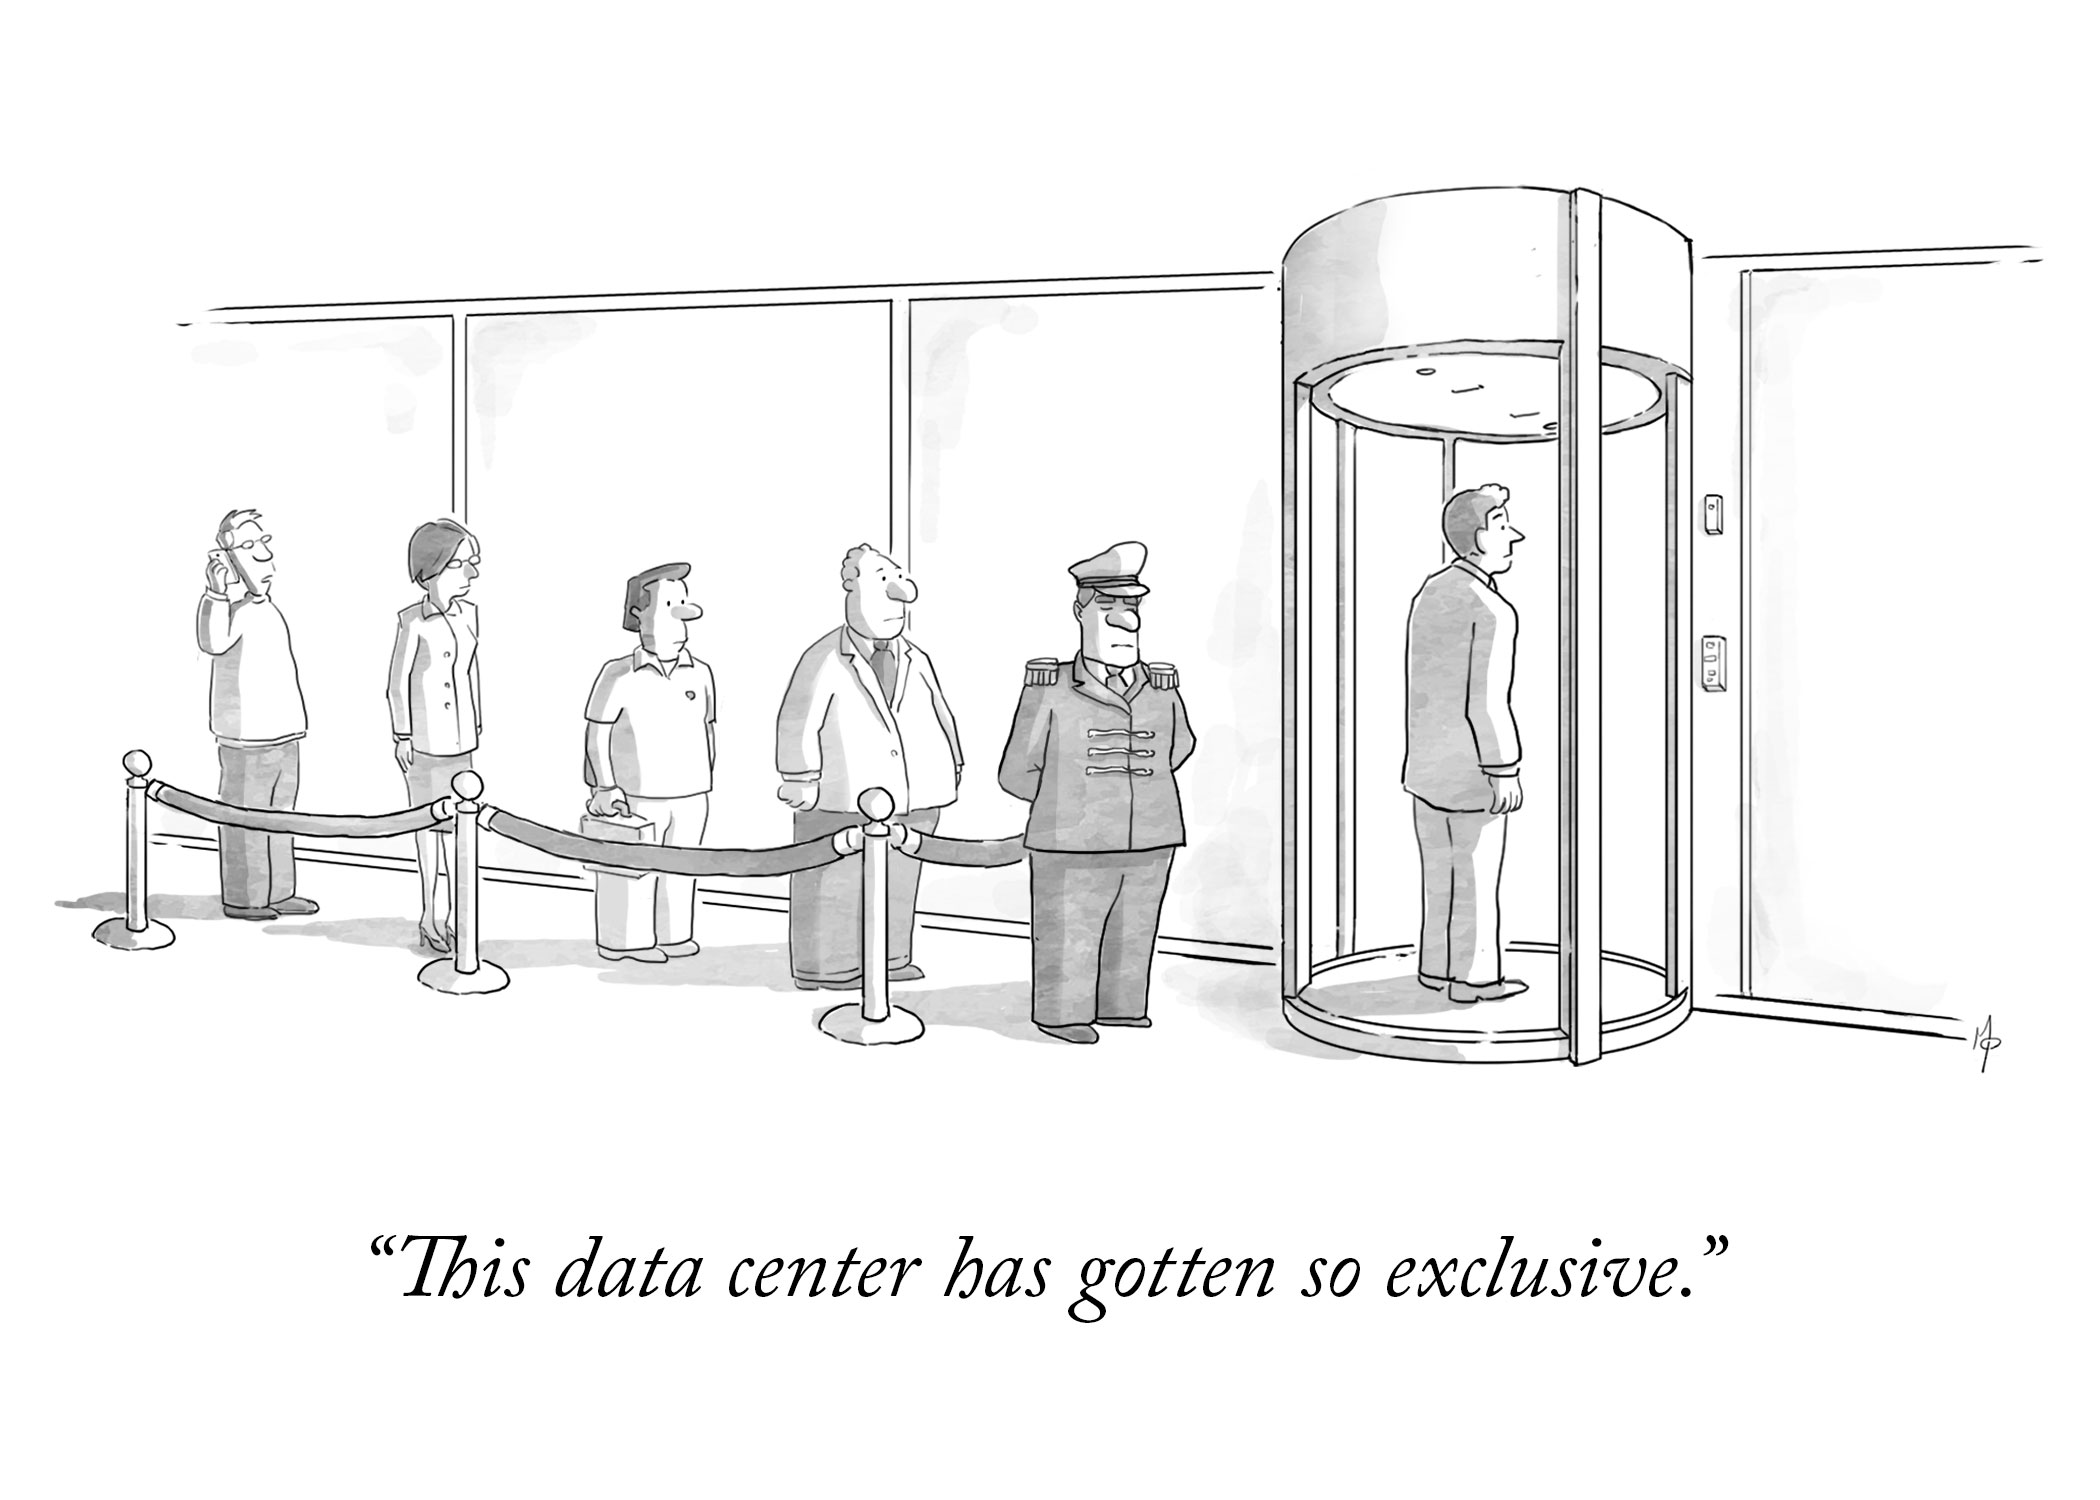 New Yorker style illustration. This is a line outside a data center with a fancy looking doorman and velvet rope. The caption reads: This IBX has gotten so exclusive.